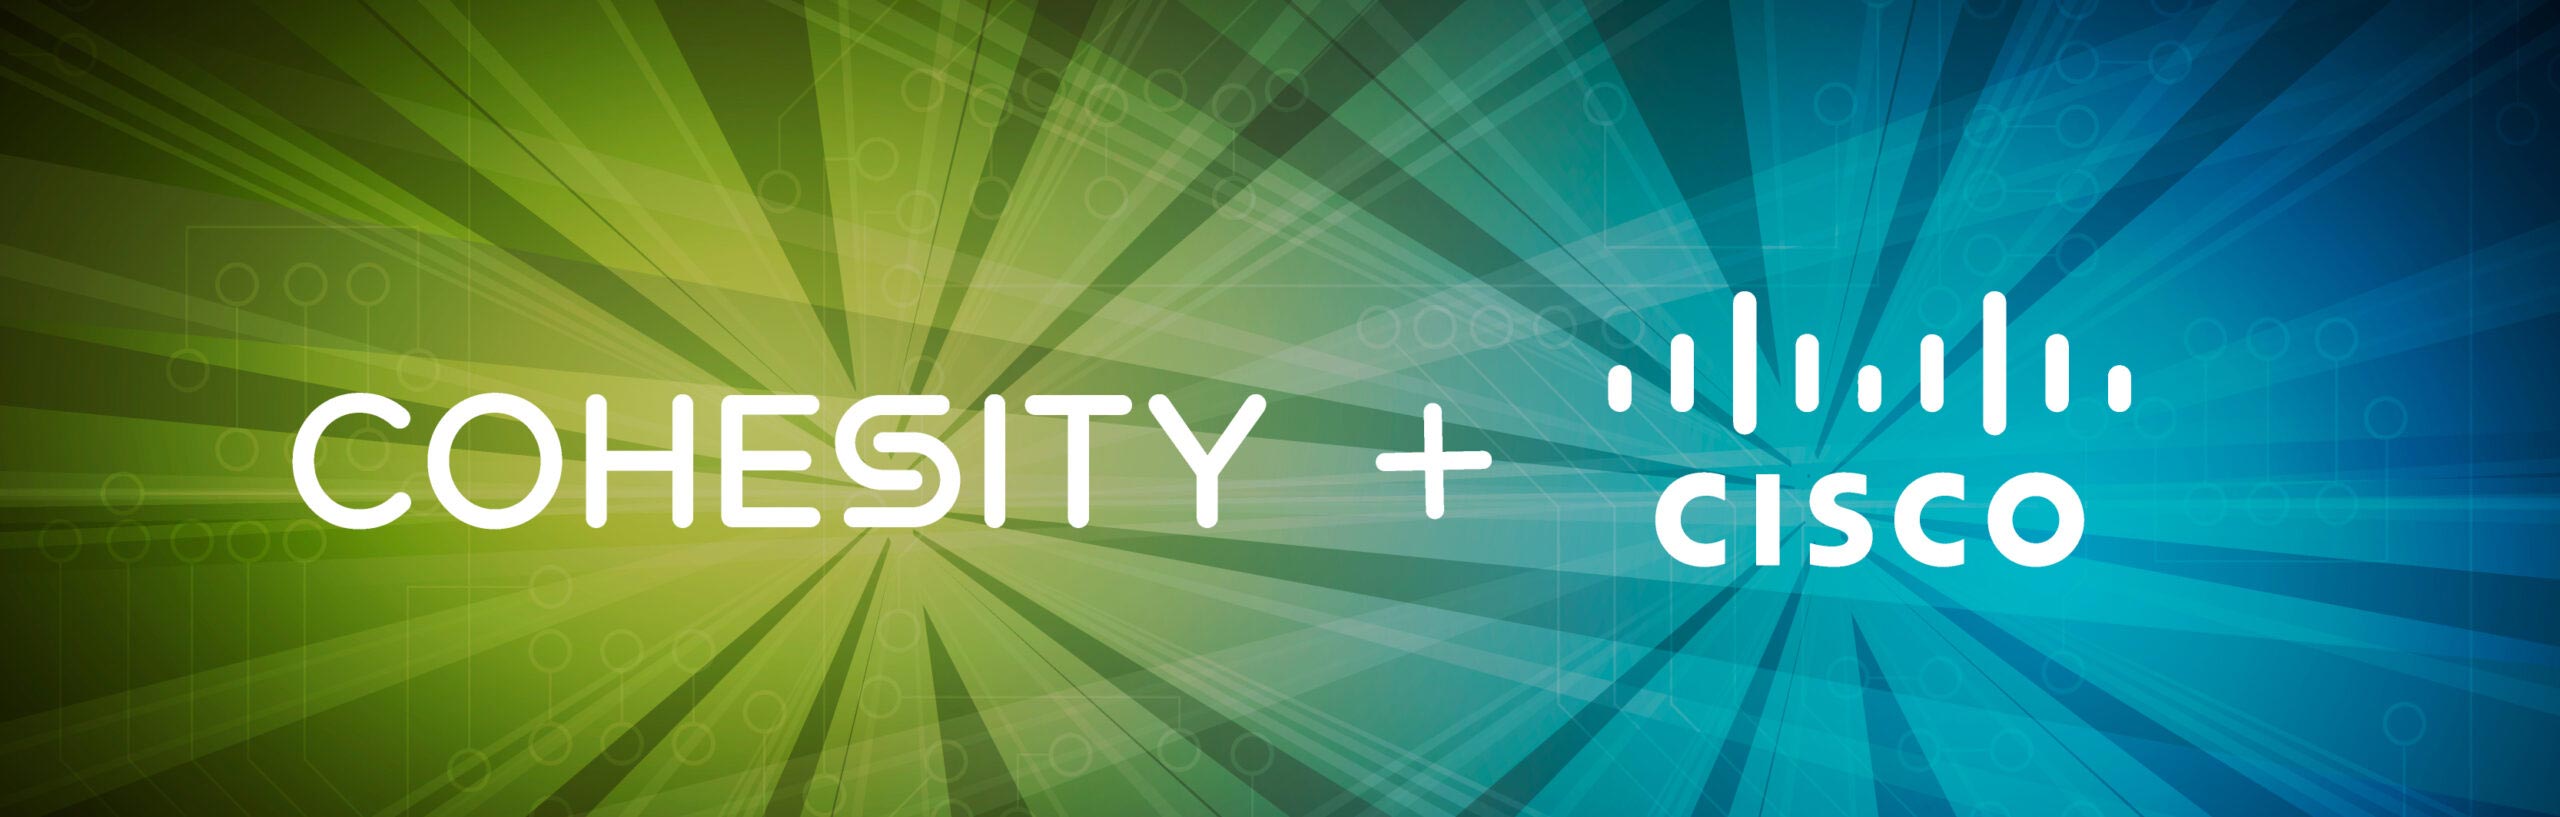 Cisco And Cohesity Join